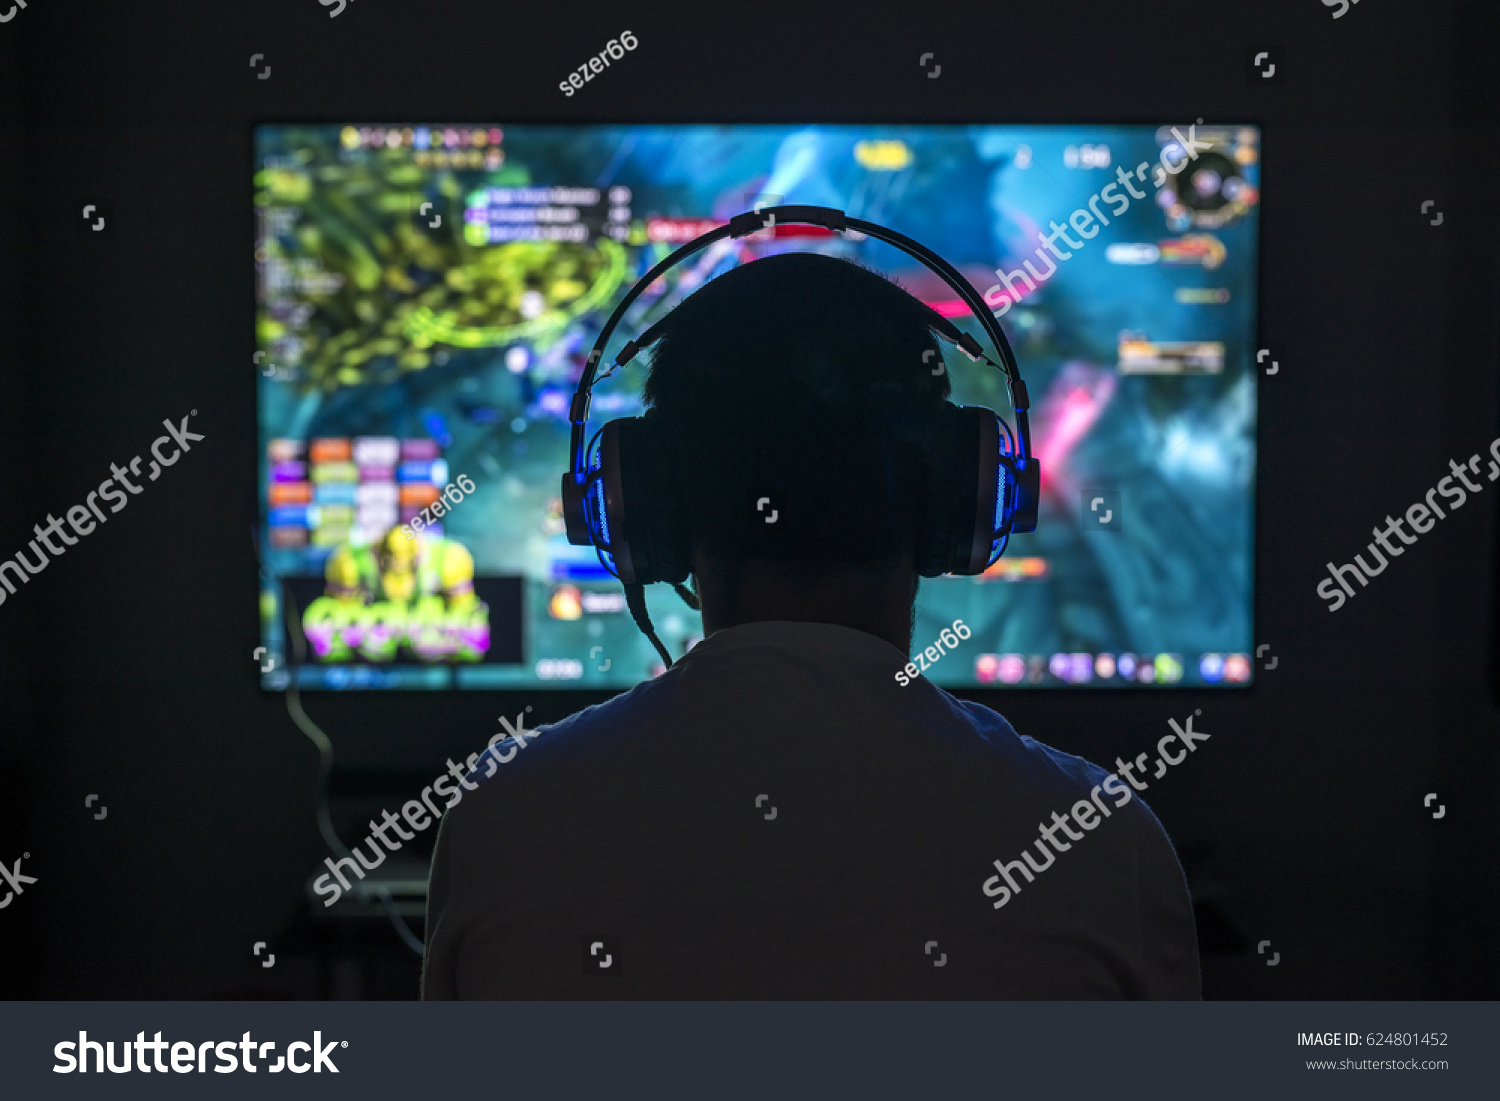 Young gamer playing video game wearing headphone.
